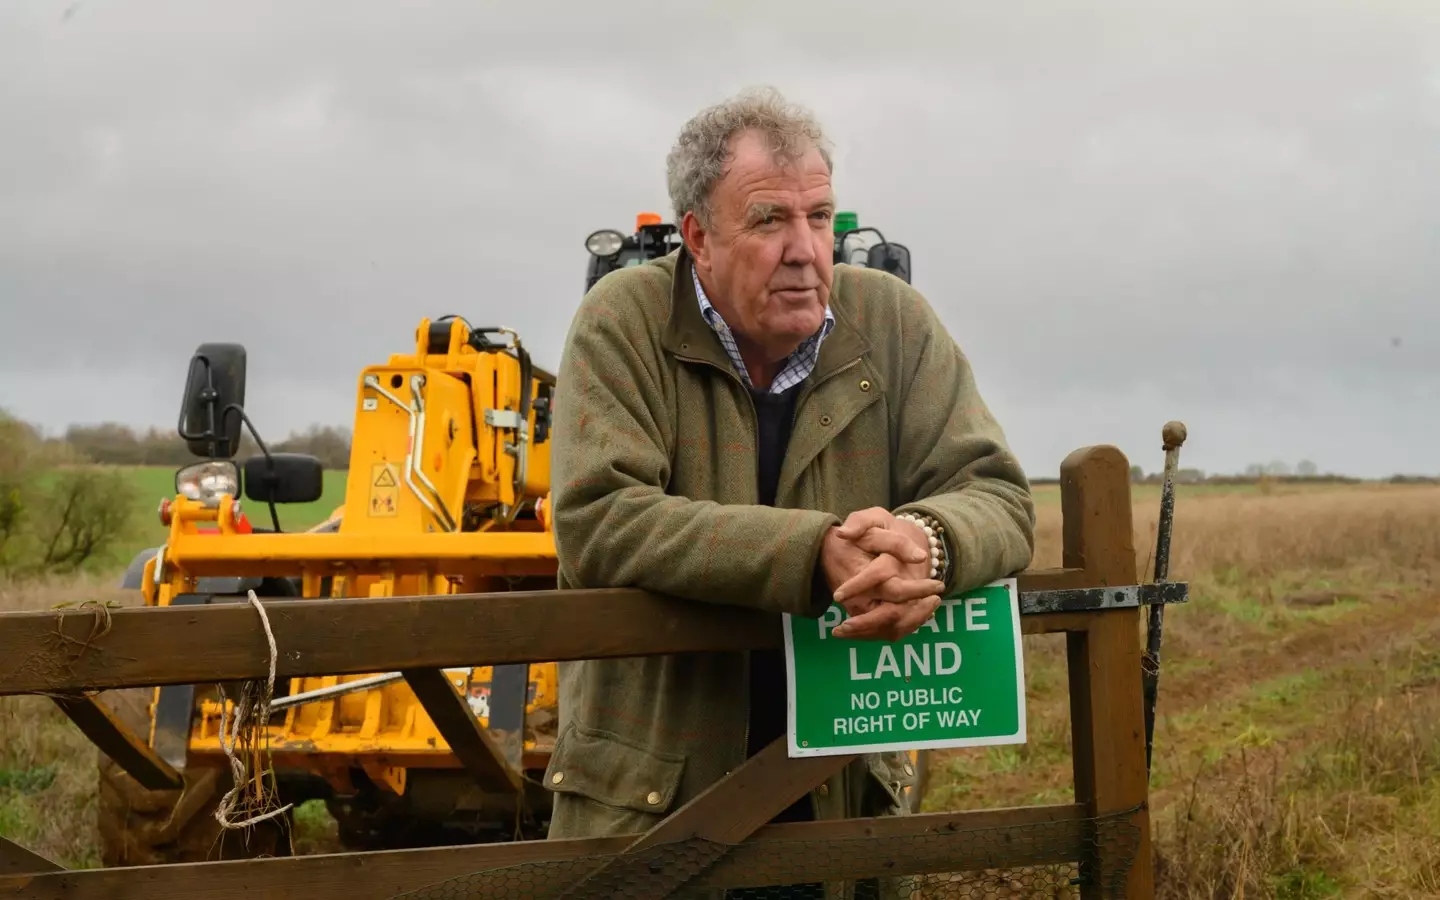 Earlier this year, it was reported that Jeremy Clarkson was likely to be axed by Amazon.